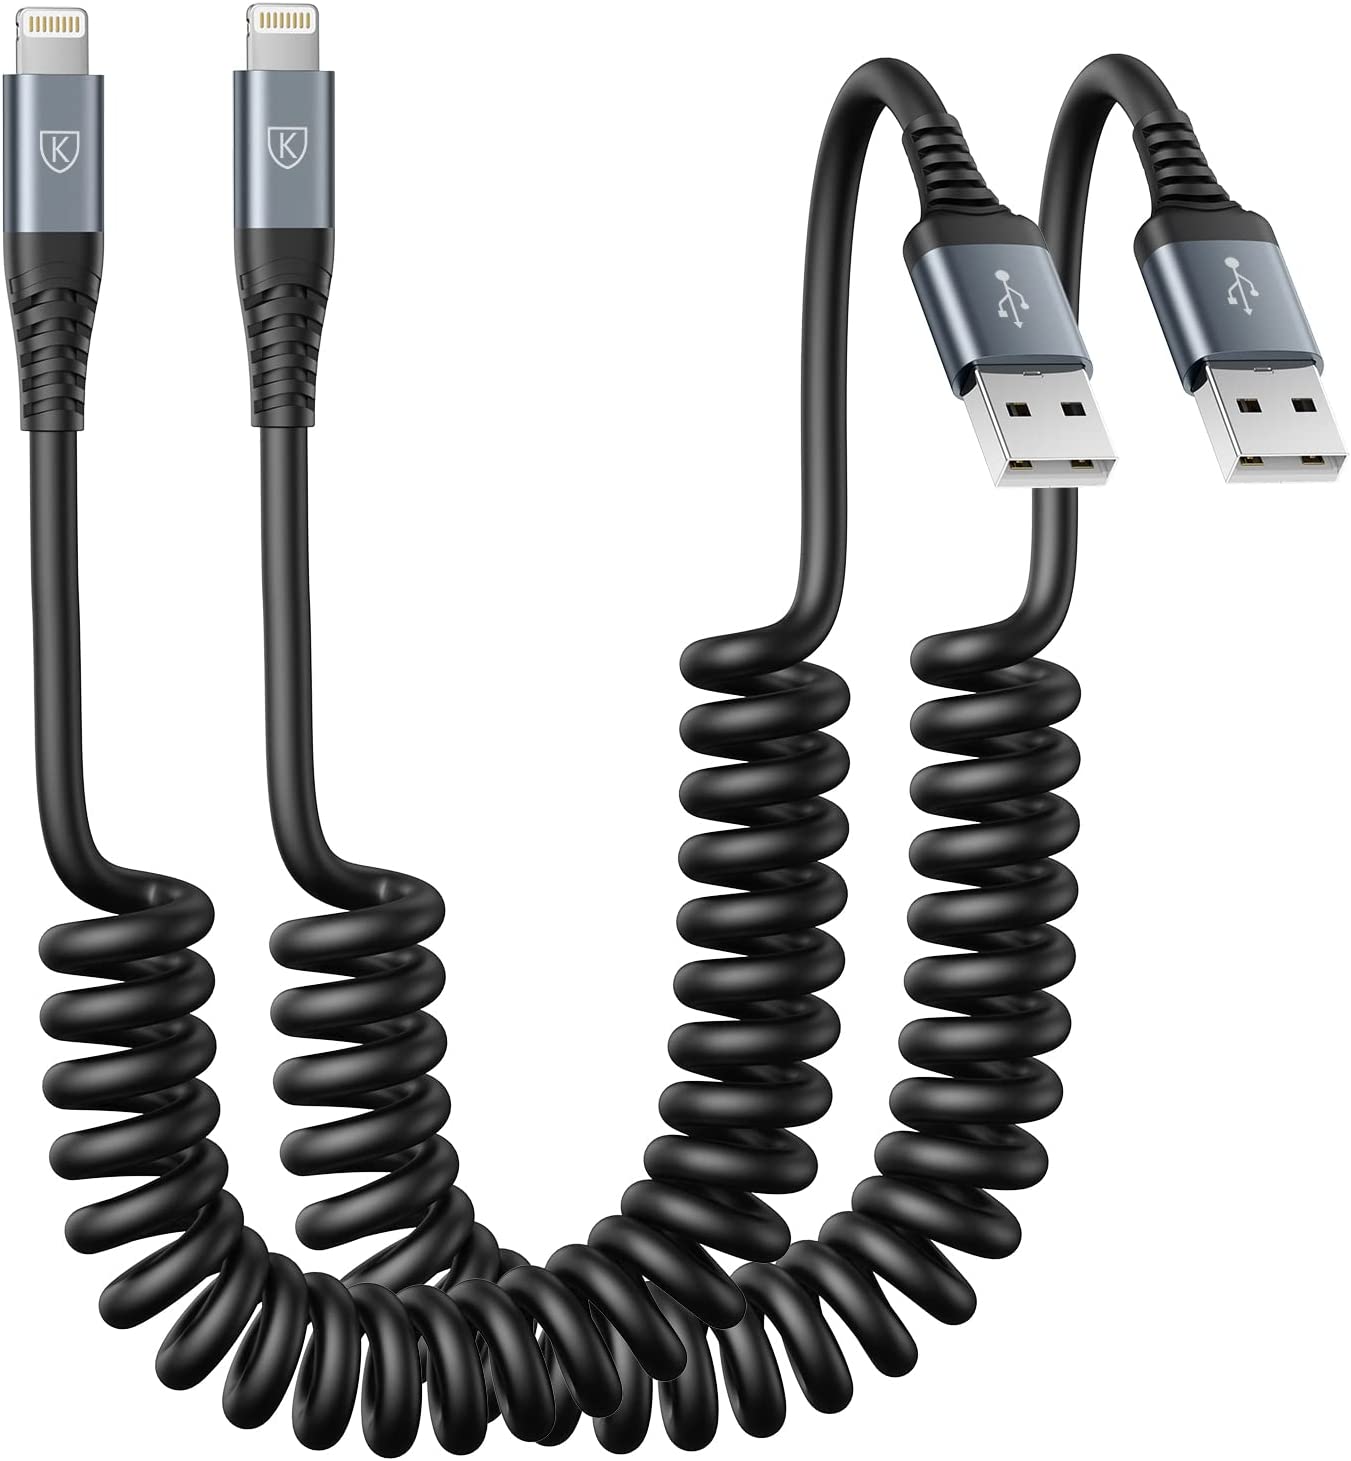 Coiled Lightning Cable, iPhone Charger Cable 3FT for [...]